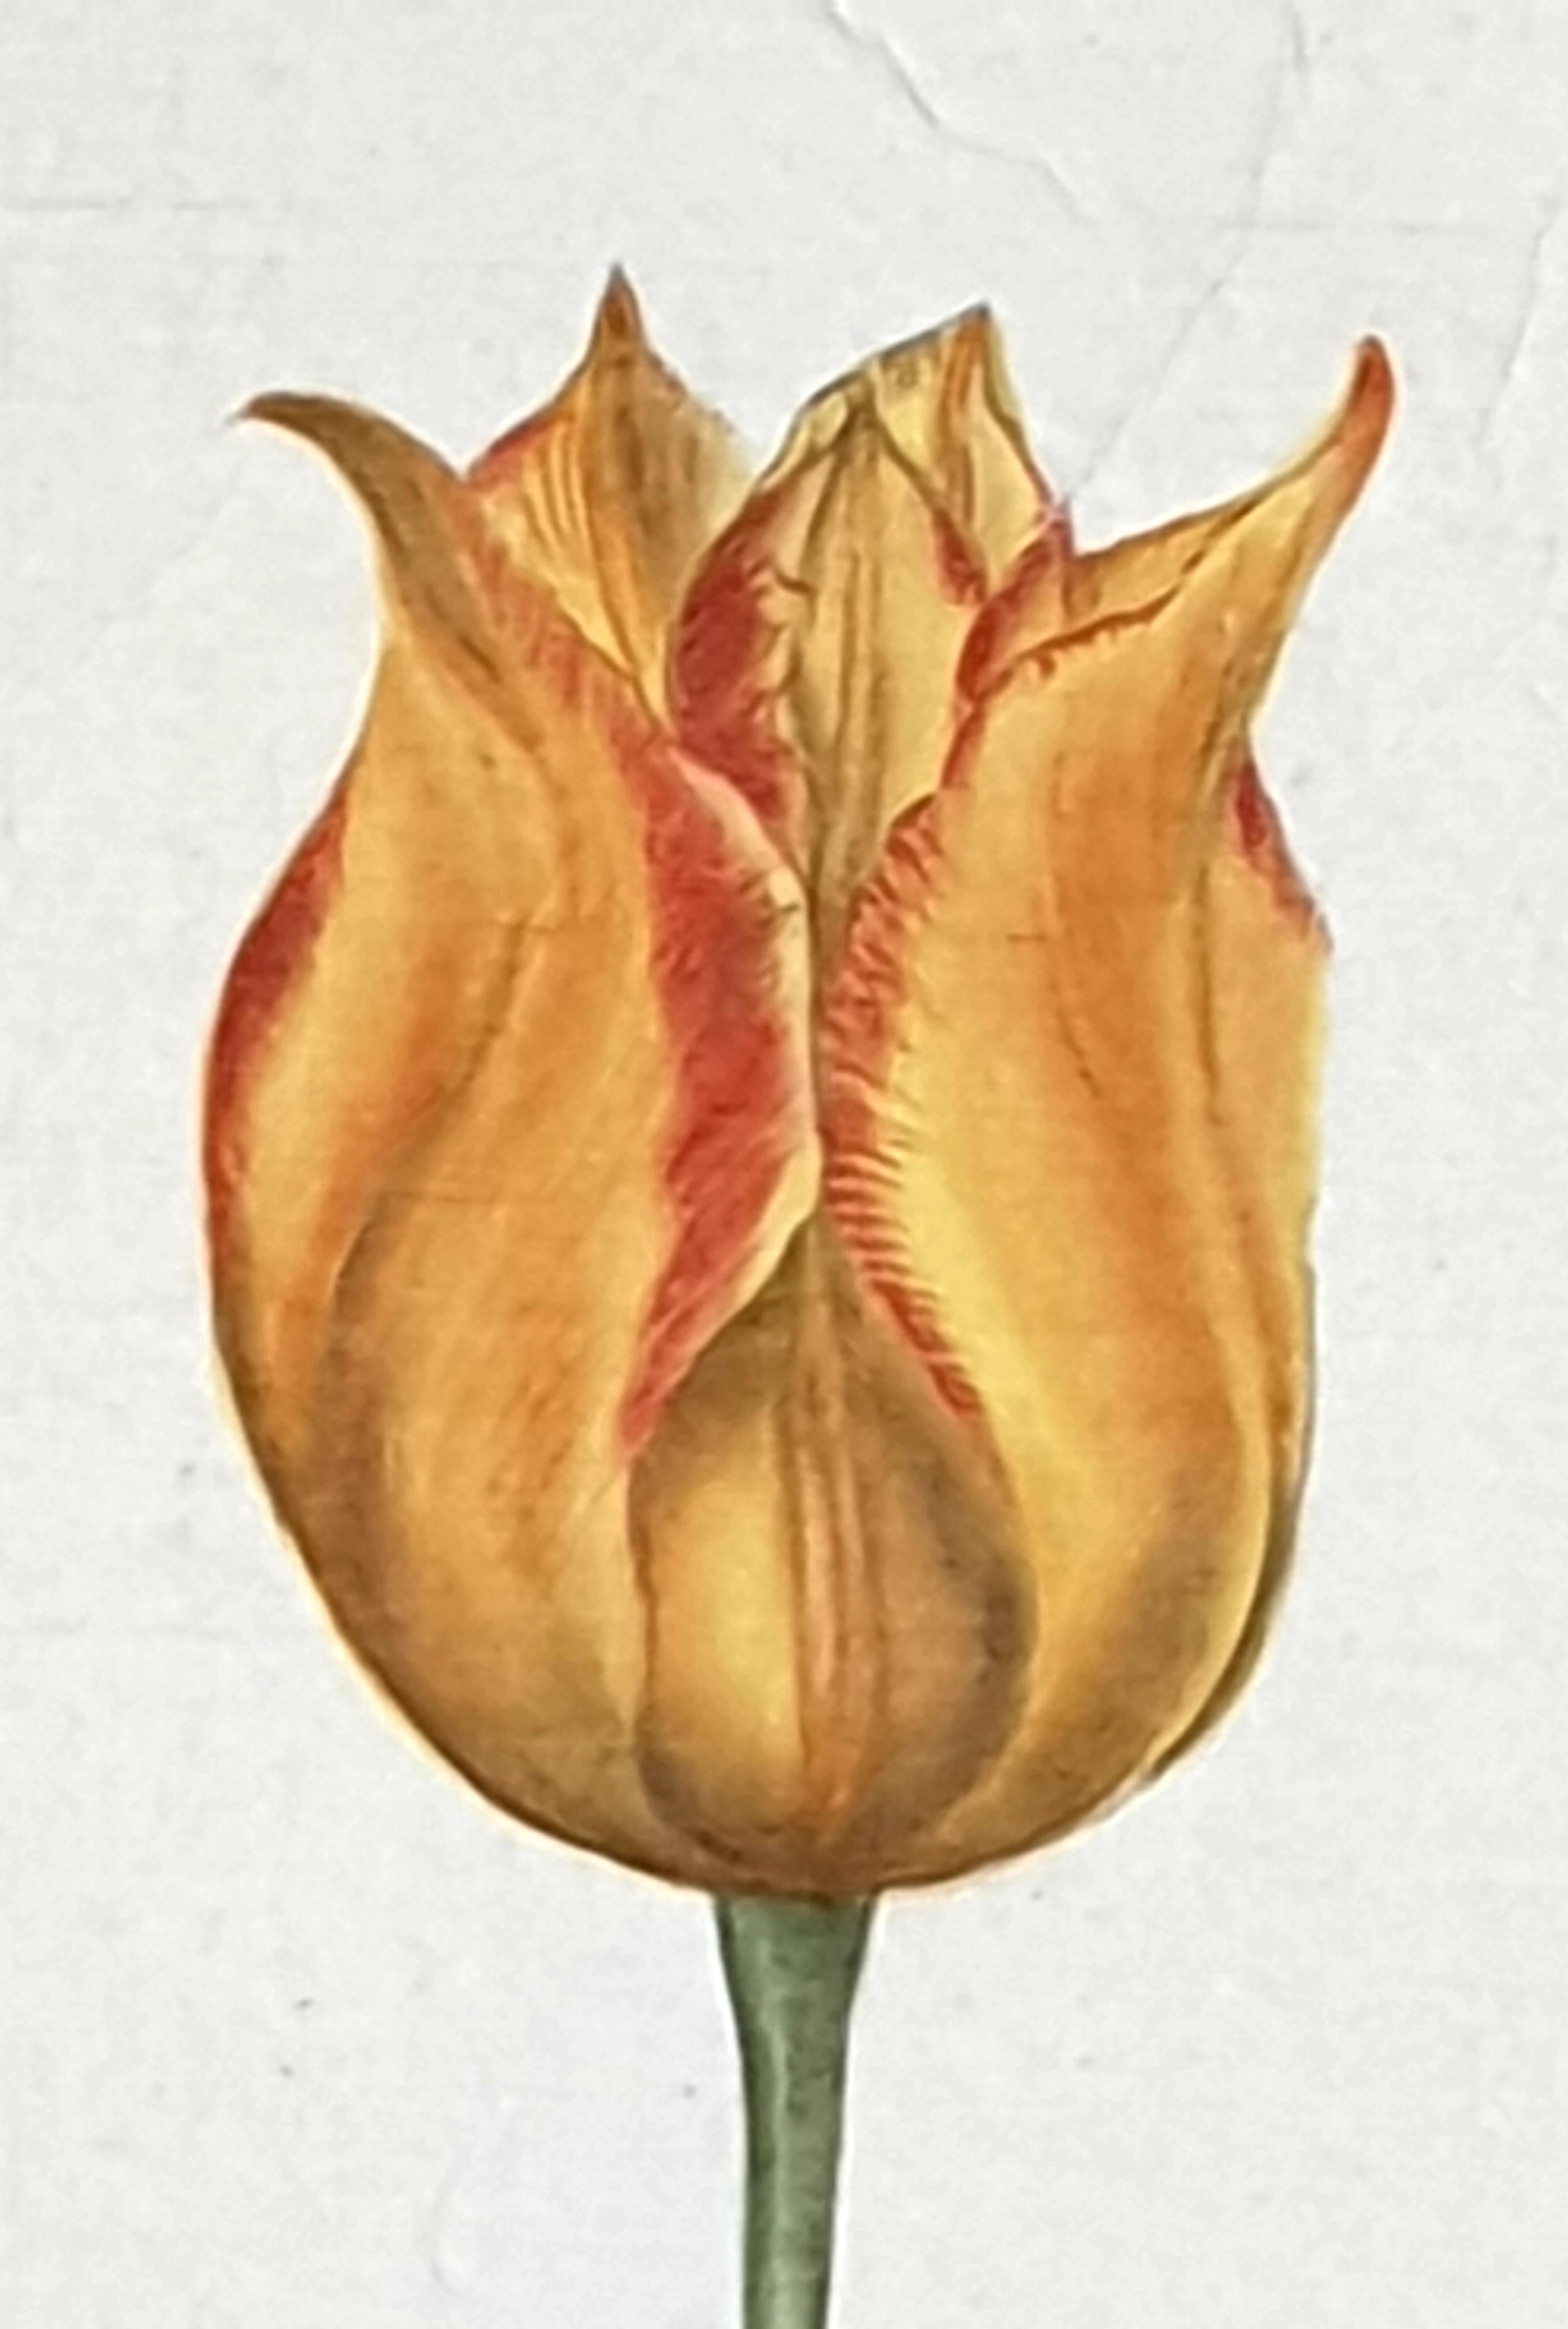 Botanical Studies, Watercolours on Silk on Handmade Paper, Set of Three Tulips. For Sale 5